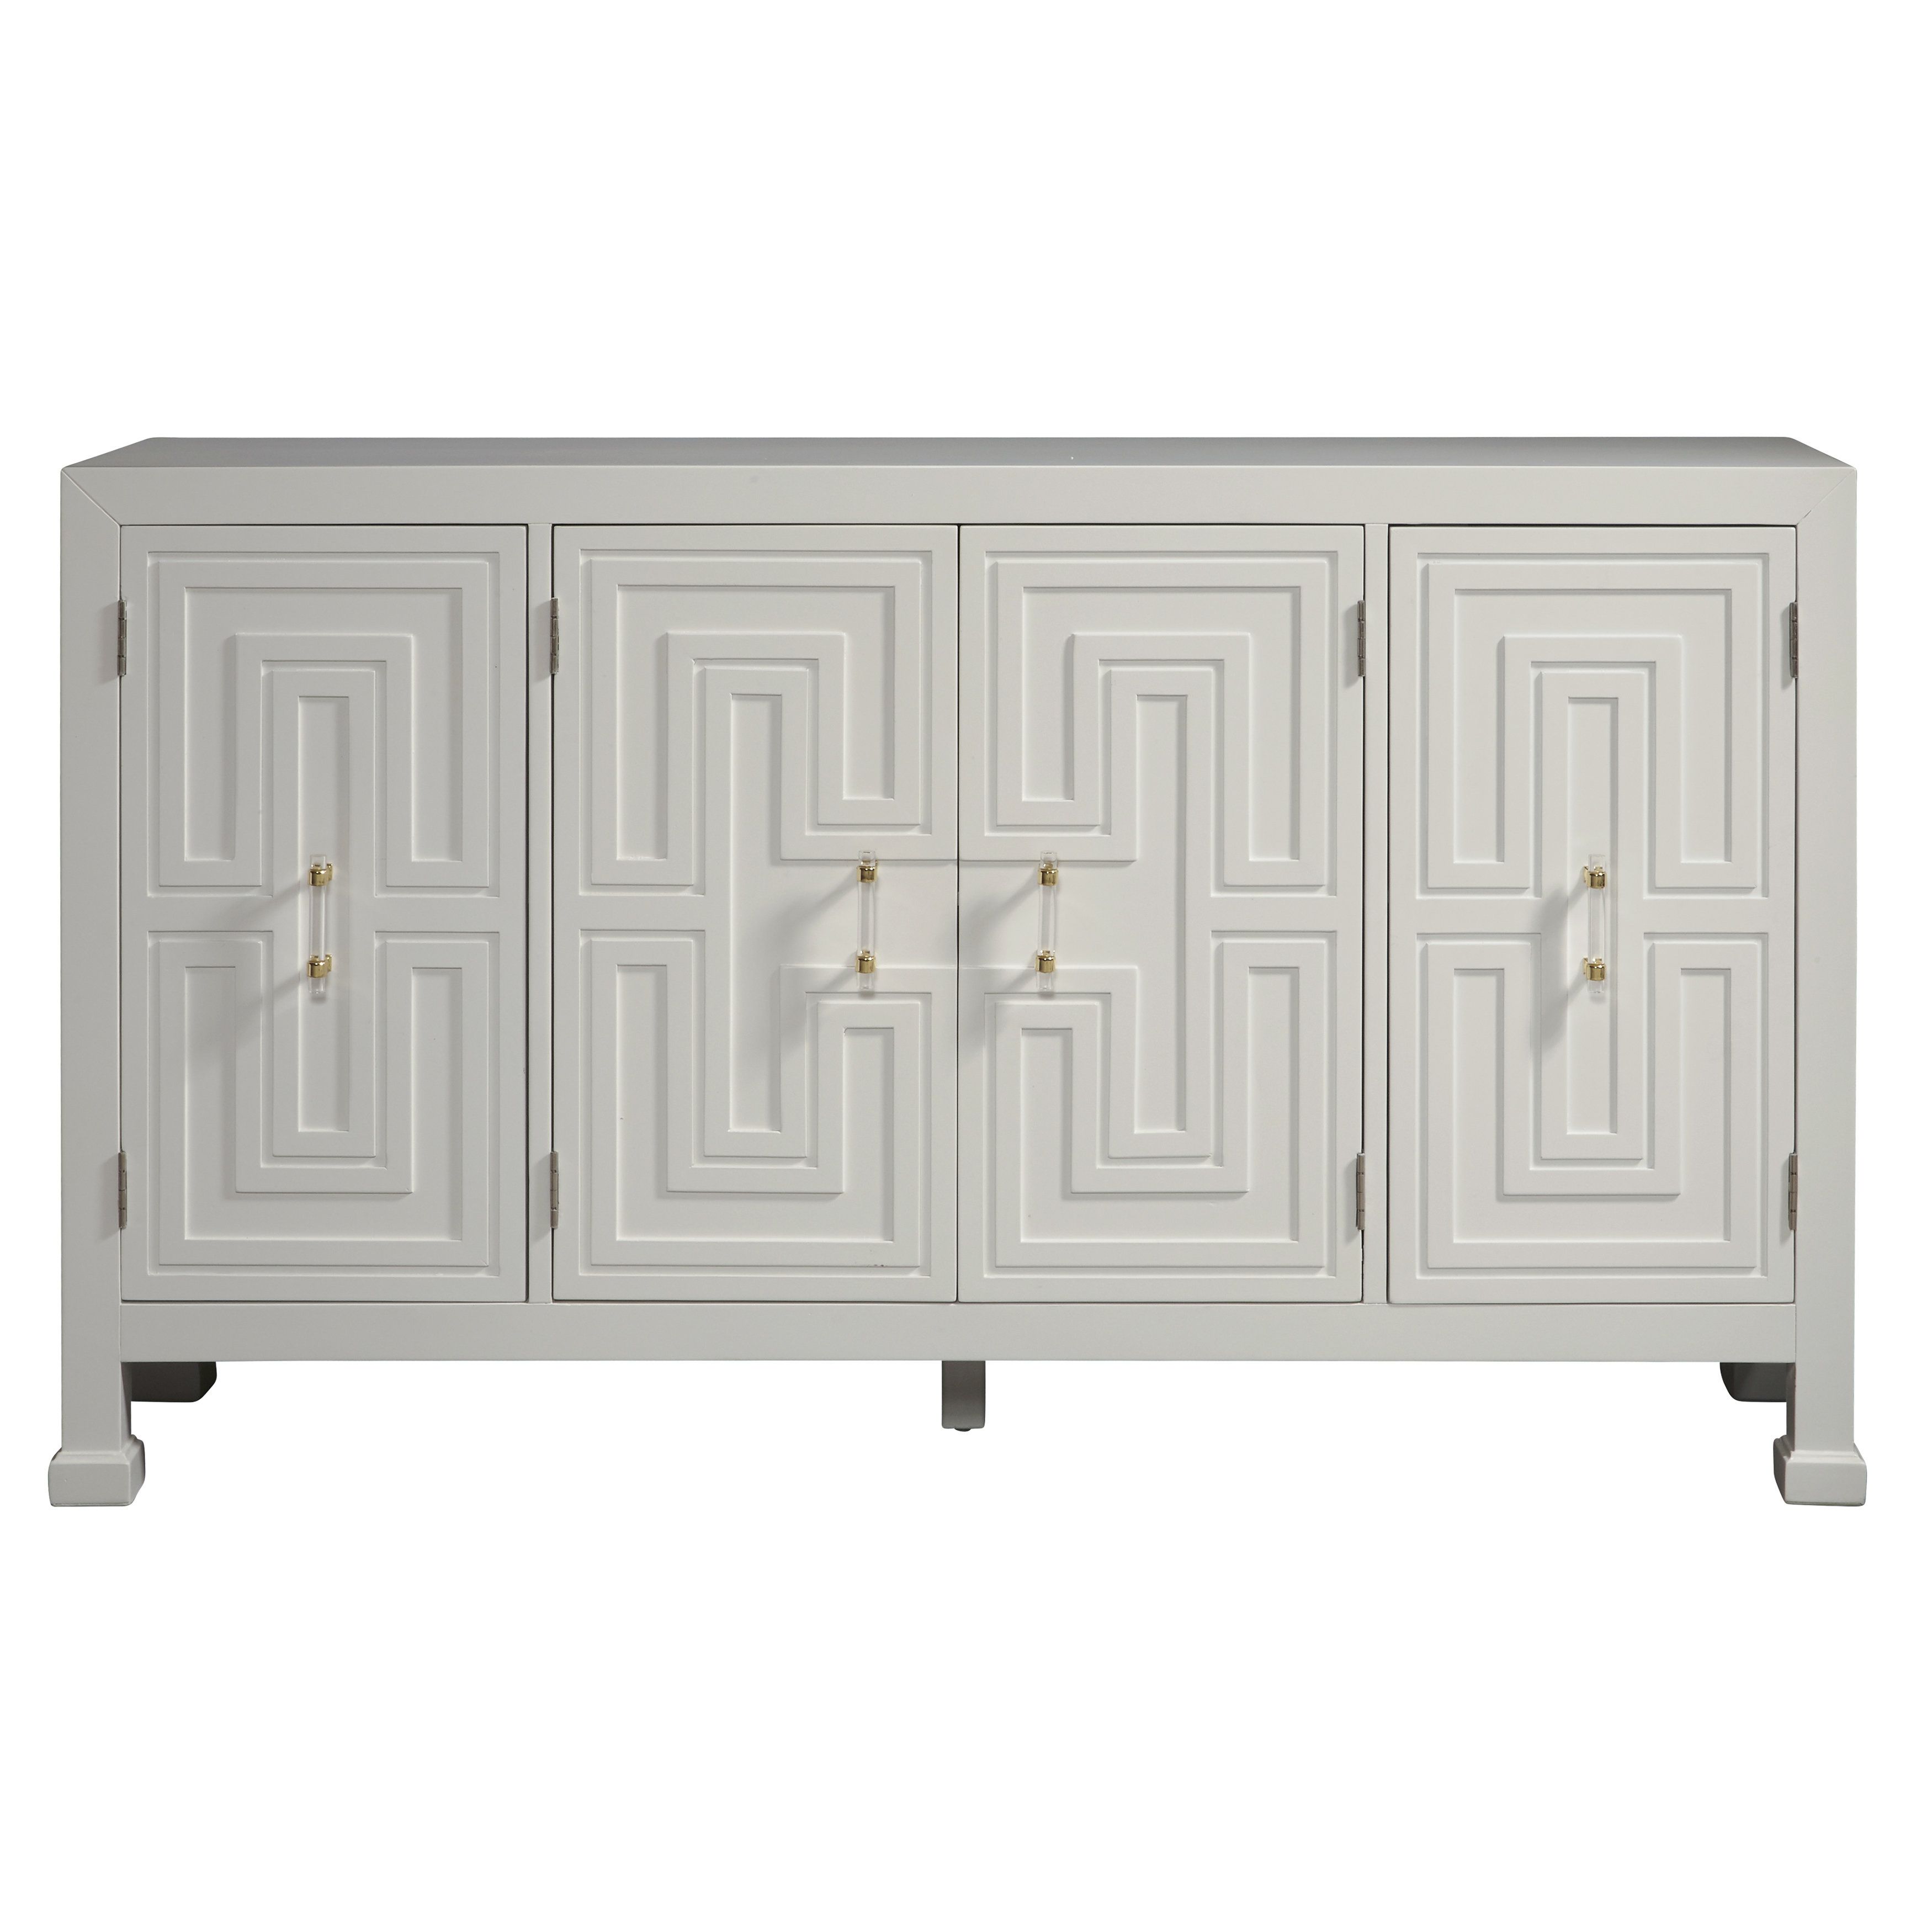 Modern & Contemporary Accent Credenza | Allmodern Throughout Exagonal Geometry Credenzas (View 23 of 30)